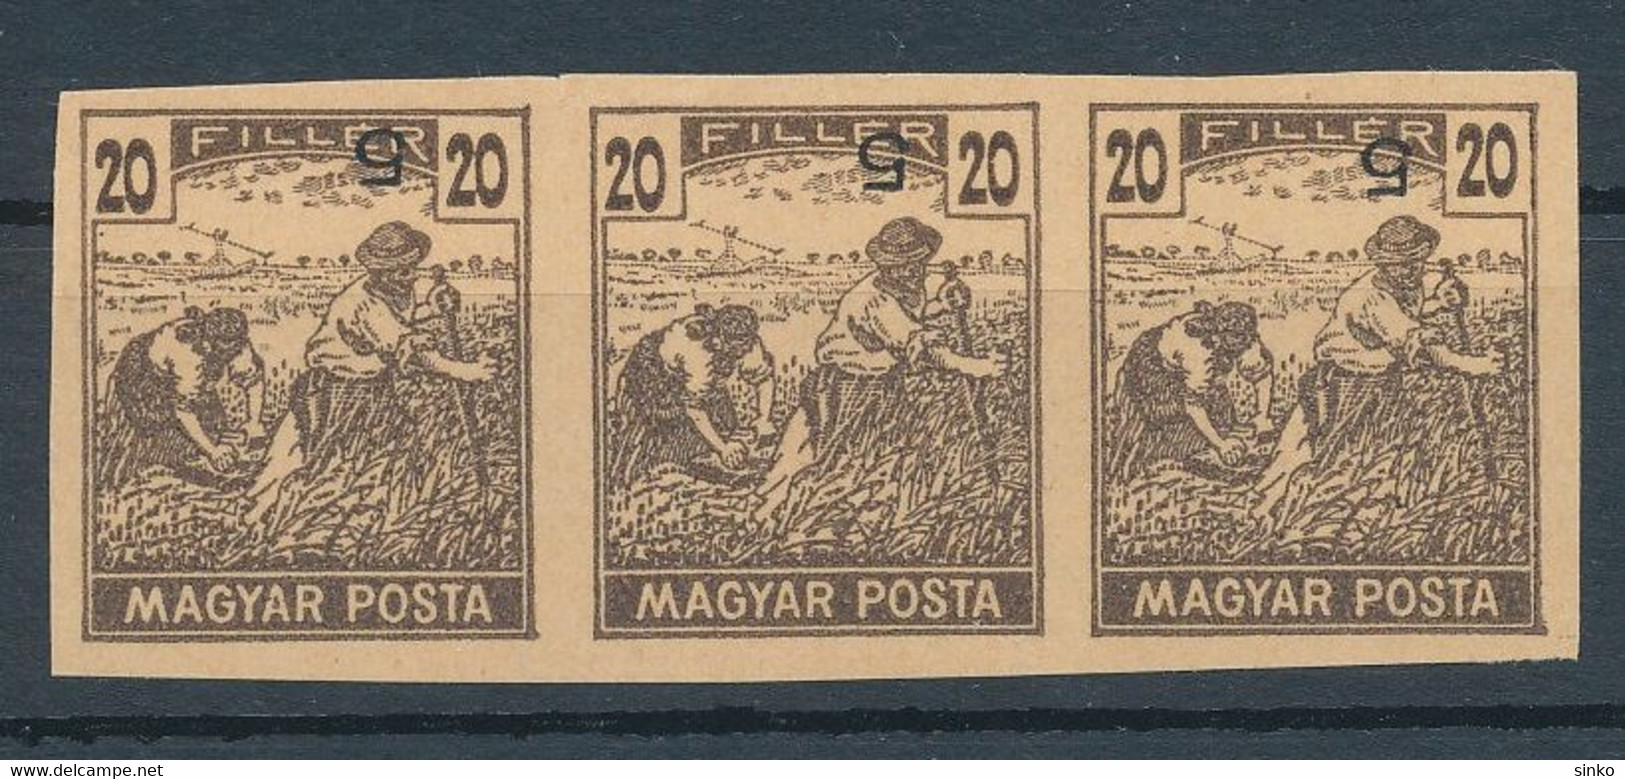 1919. Hungarian Post Office 20f Stamps - Test Print - Errors, Freaks & Oddities (EFO)